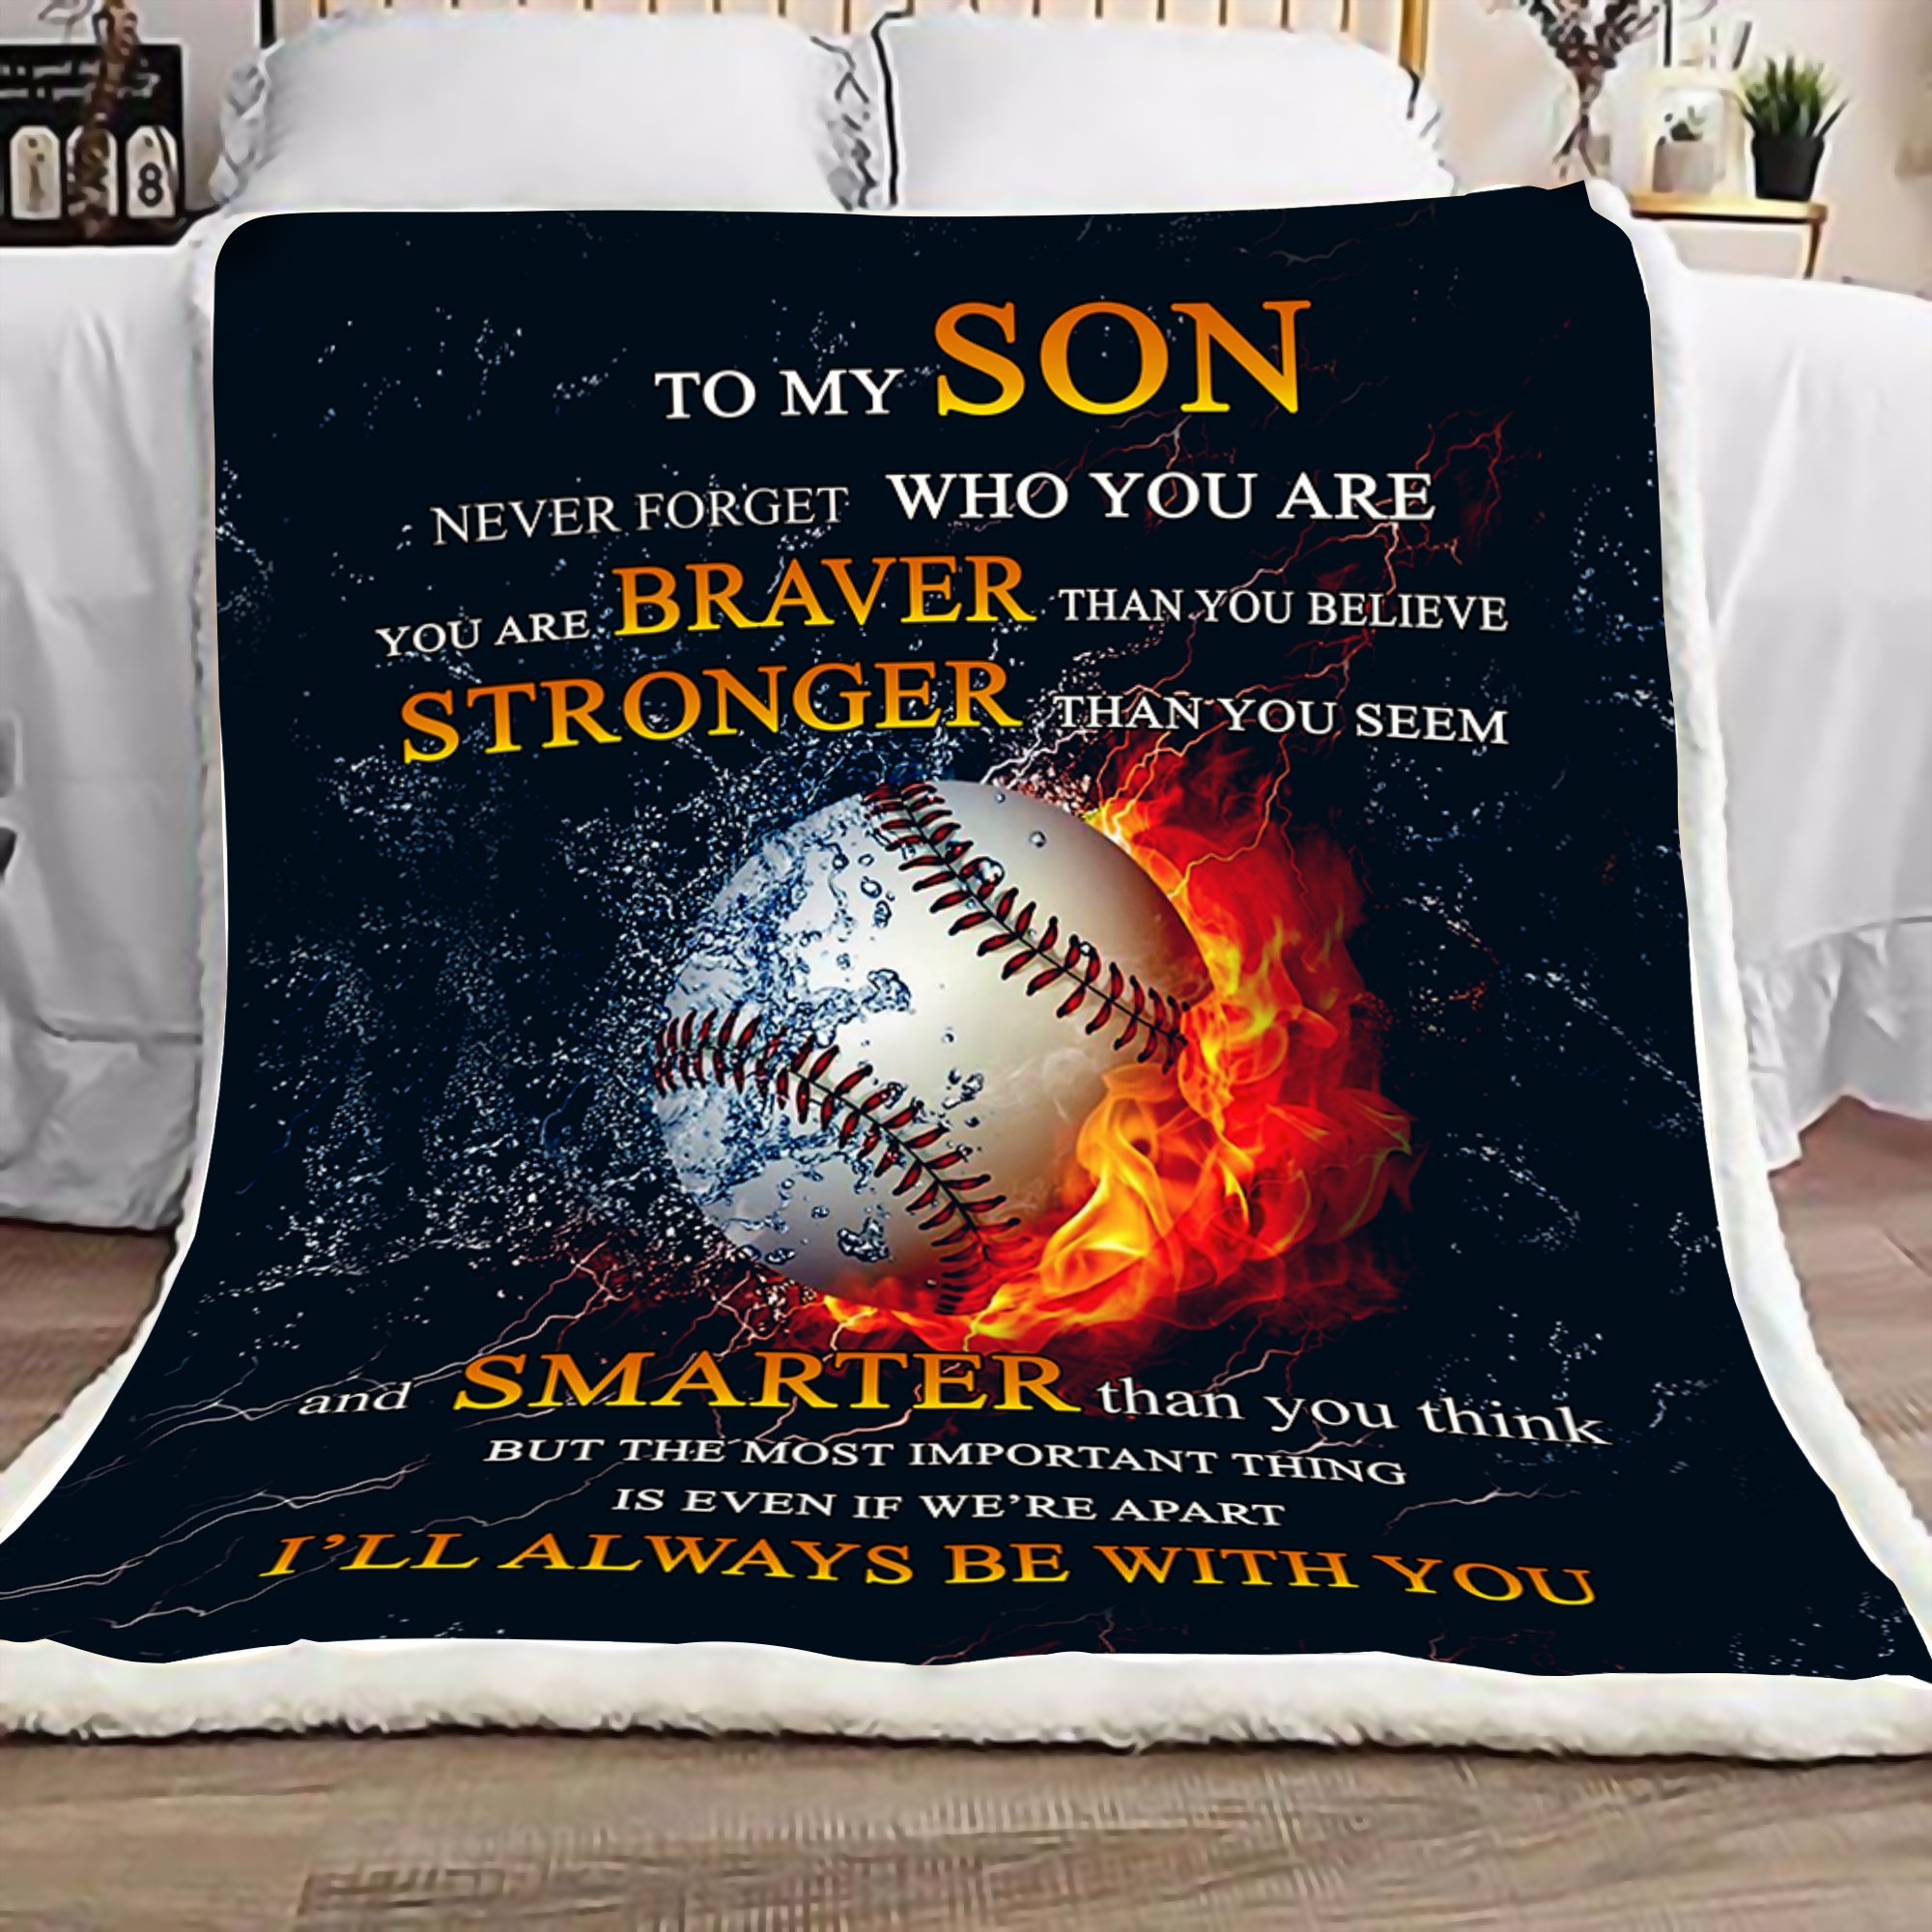 To my son never forget who you are baseball blanket 1